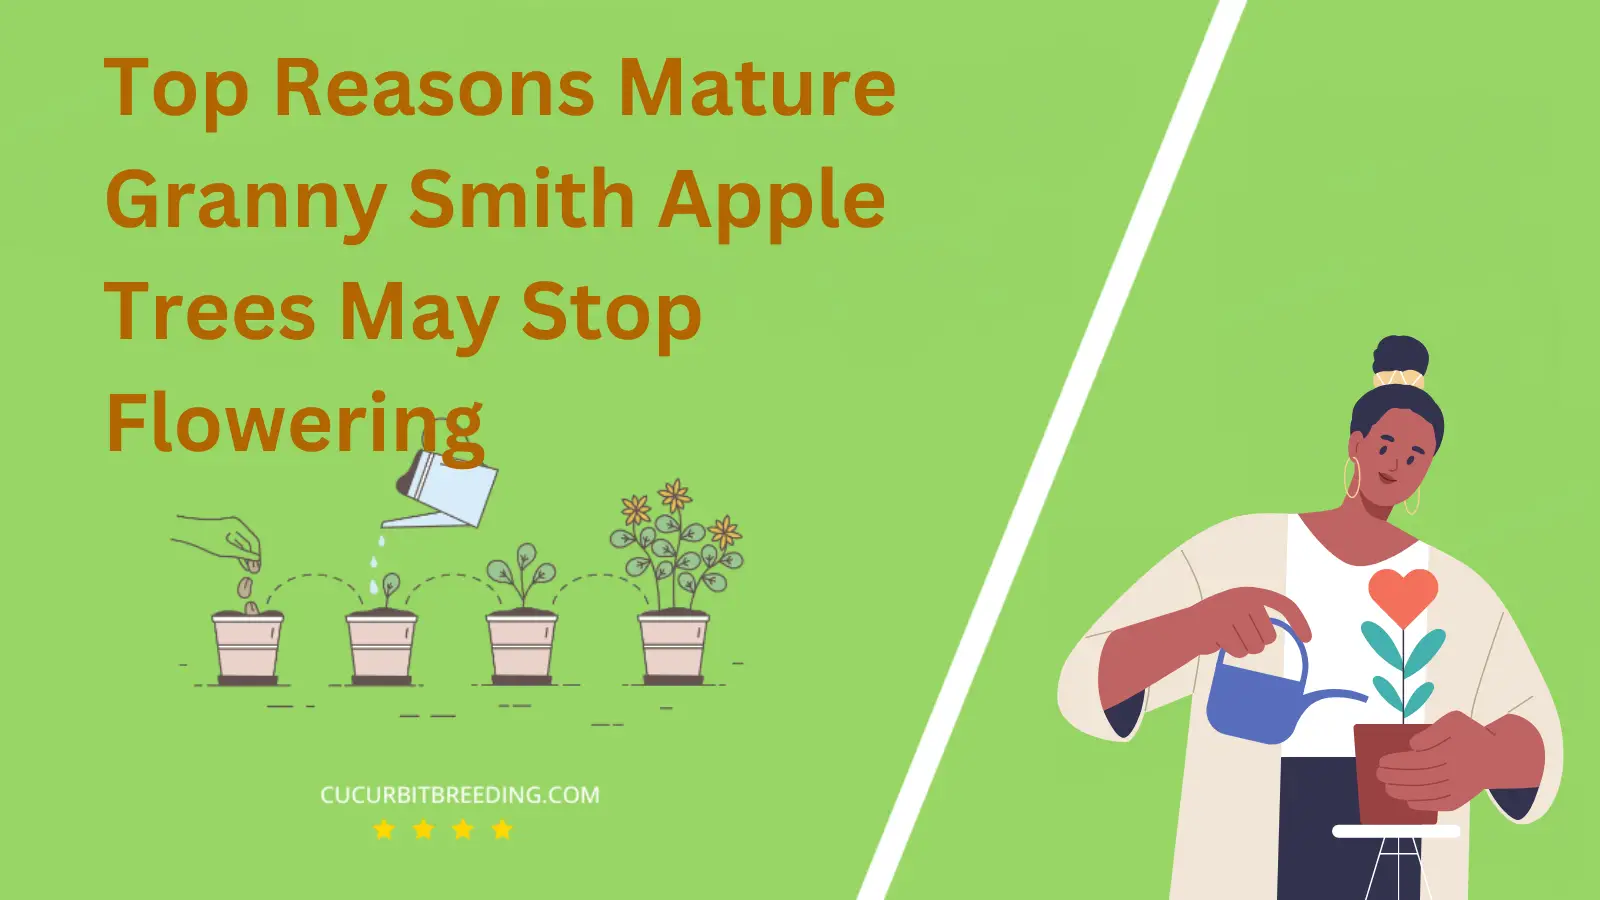 Top Reasons Mature Granny Smith Apple Trees May Stop Flowering